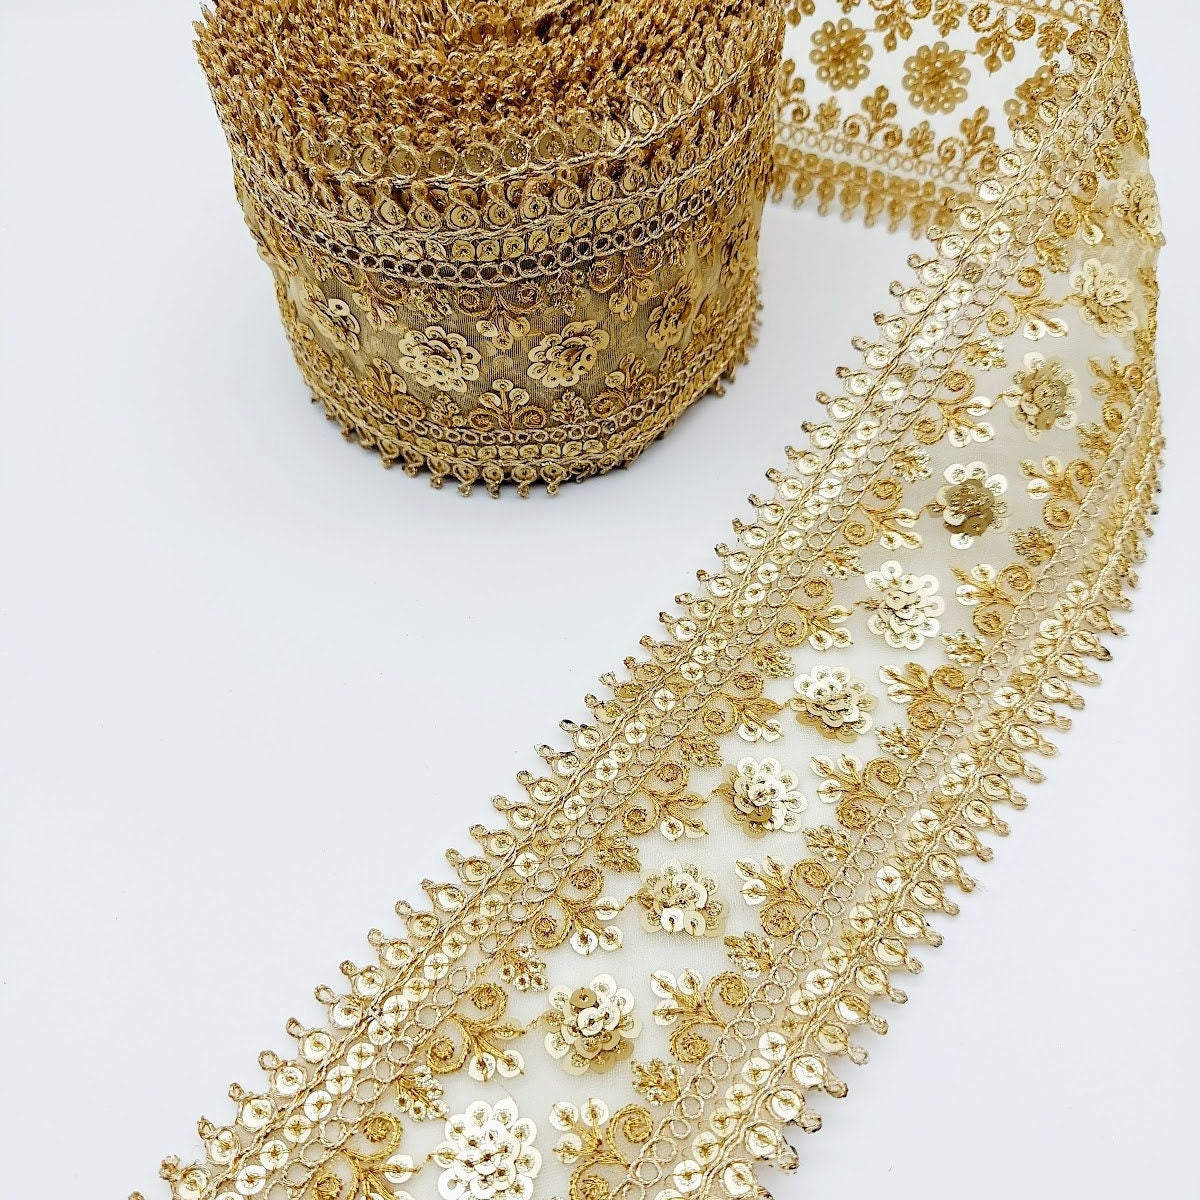 Gold Sequins Trim 2 Yards Decorative Embroidered Lace Sari Border Costume Ribbon Crafting Sewing Tape